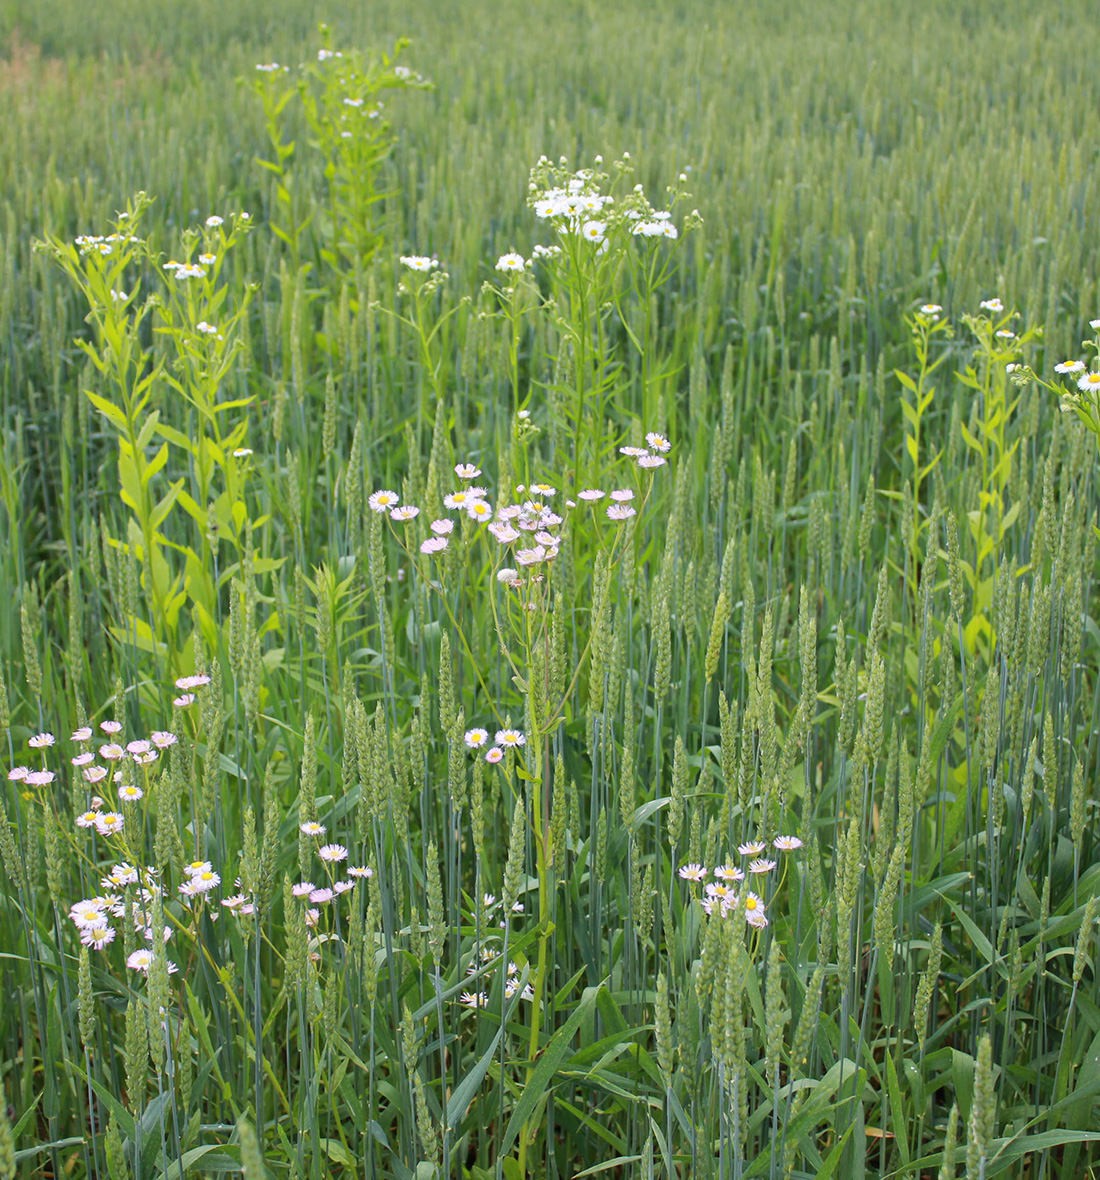 A cereal field with annual fleabane and the more pinkish flowered Philadelphia fleabane during late June